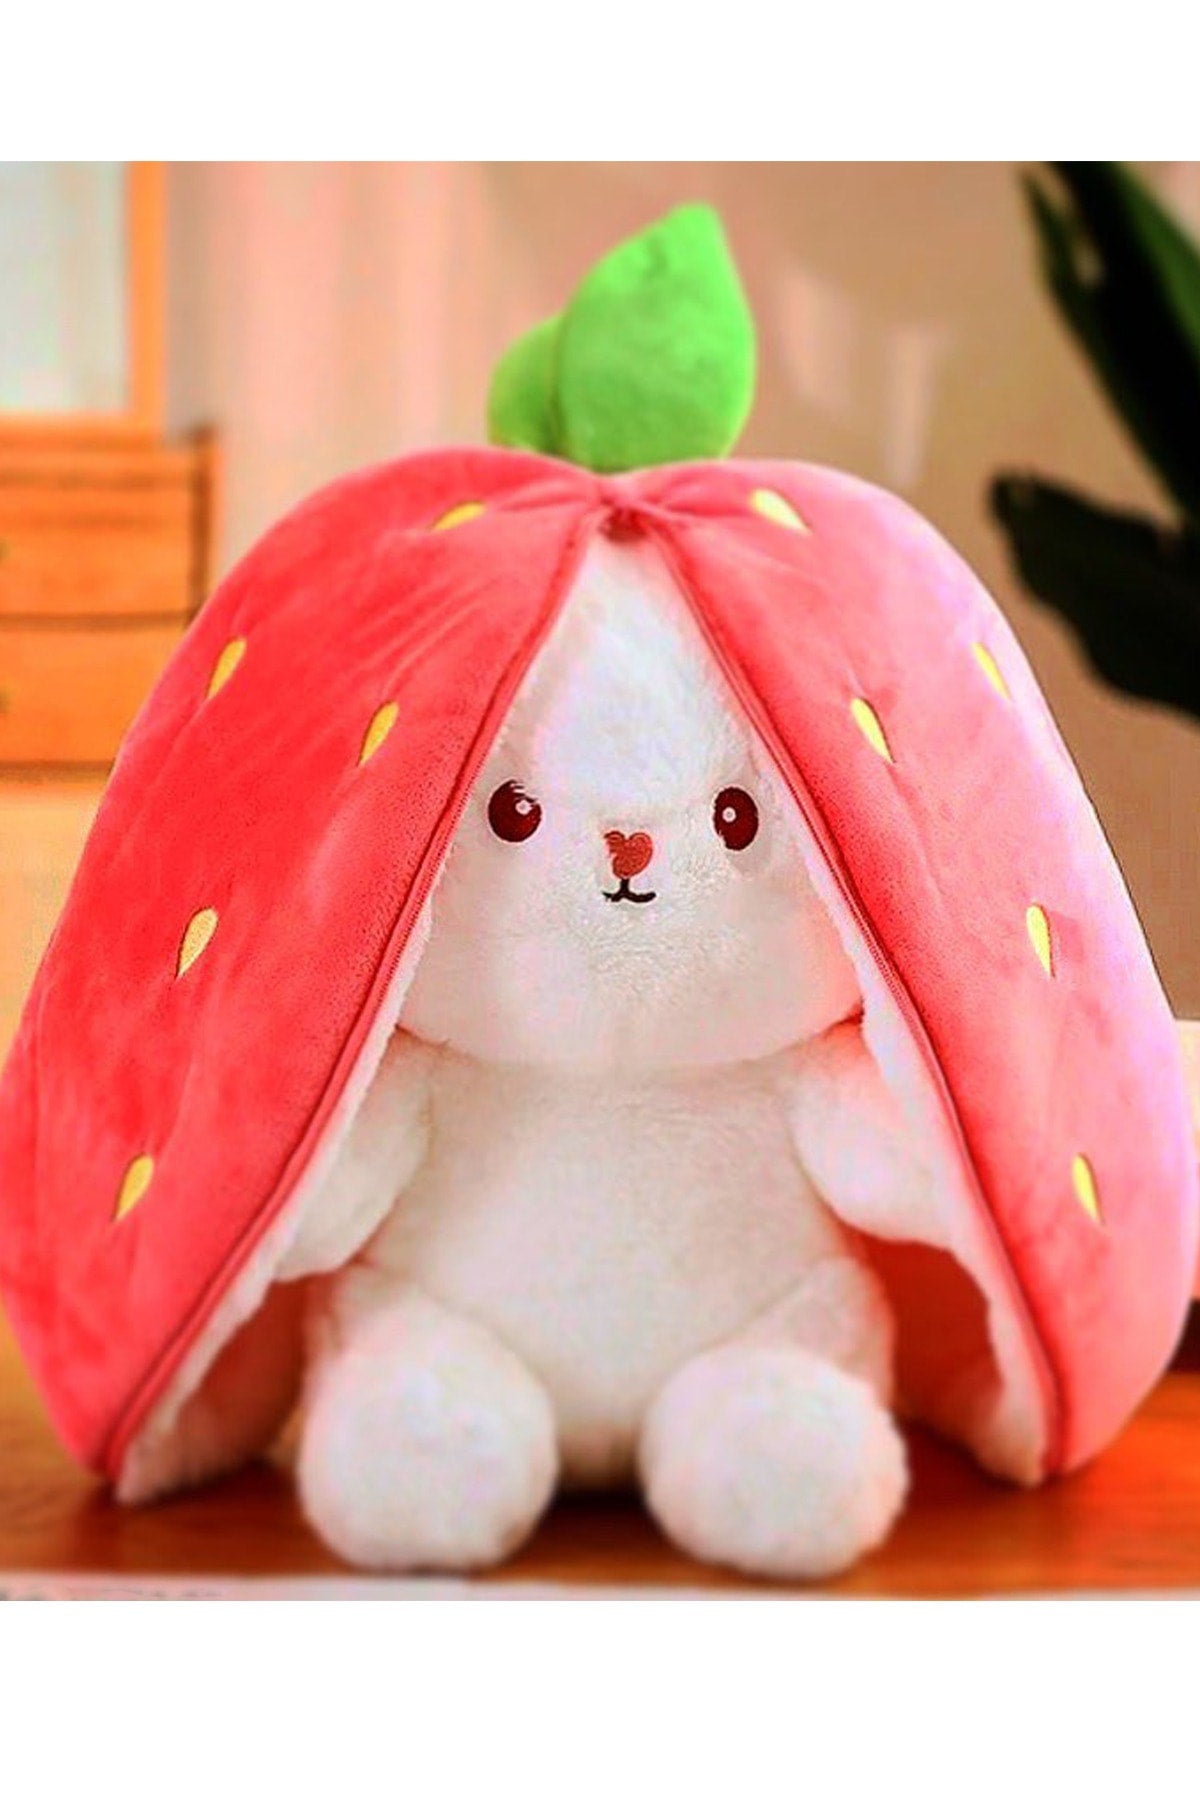 The Sweetest Strawberry Rabbit Sleeping Companion 50cm- Special Design Both Strawberry and Rabbit